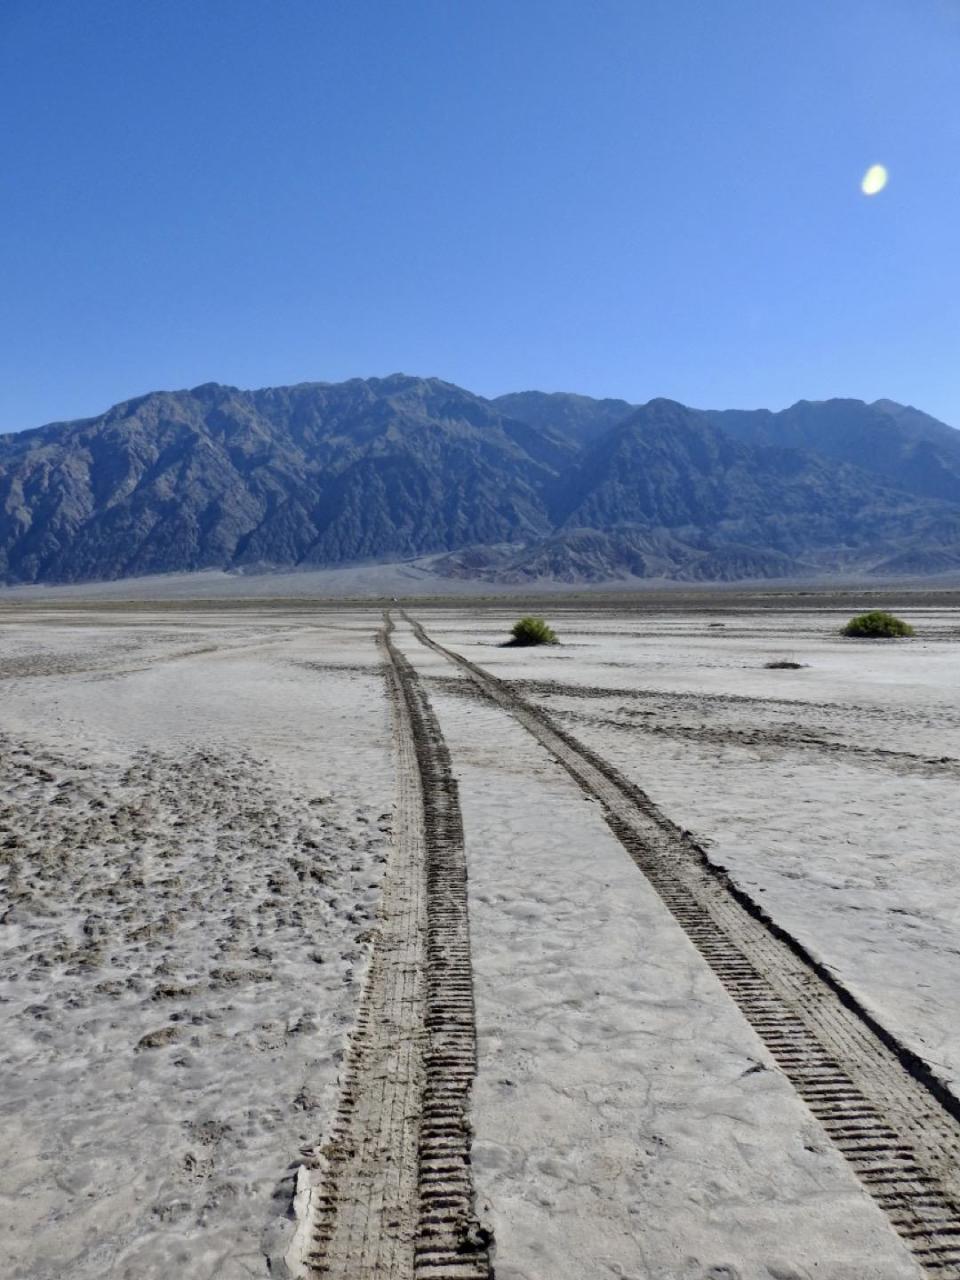 The dual tracks of the car that had gotten stuck and the skid steer used to remove it from a salt flat in Death Valley National Park. / Credit: National Park Service